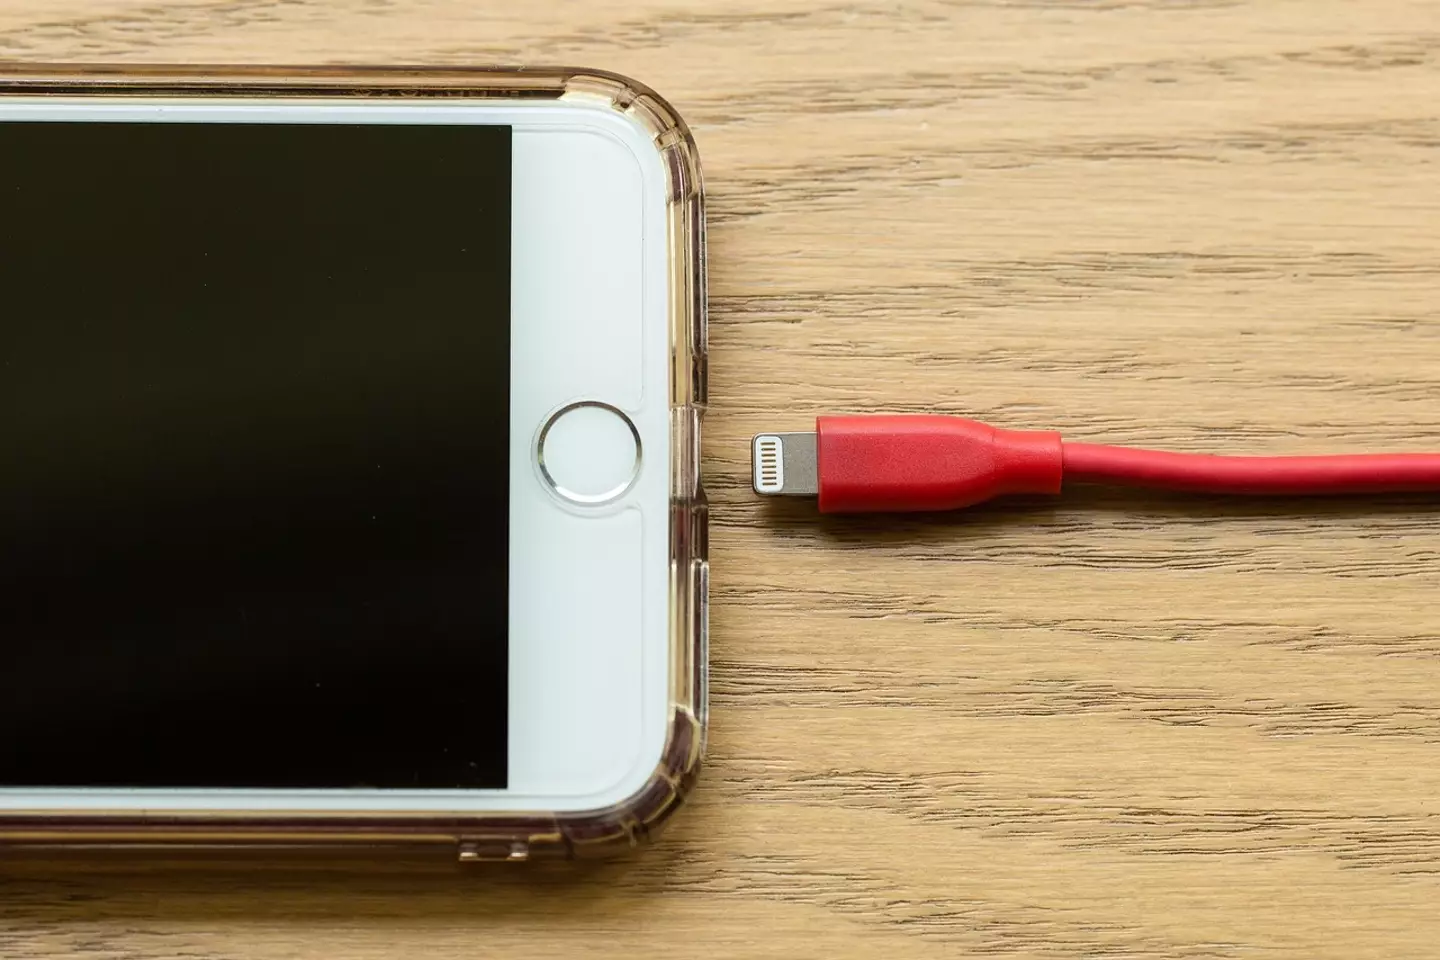 Your iPhone battery could be drained by a hidden 'vampire' feature.